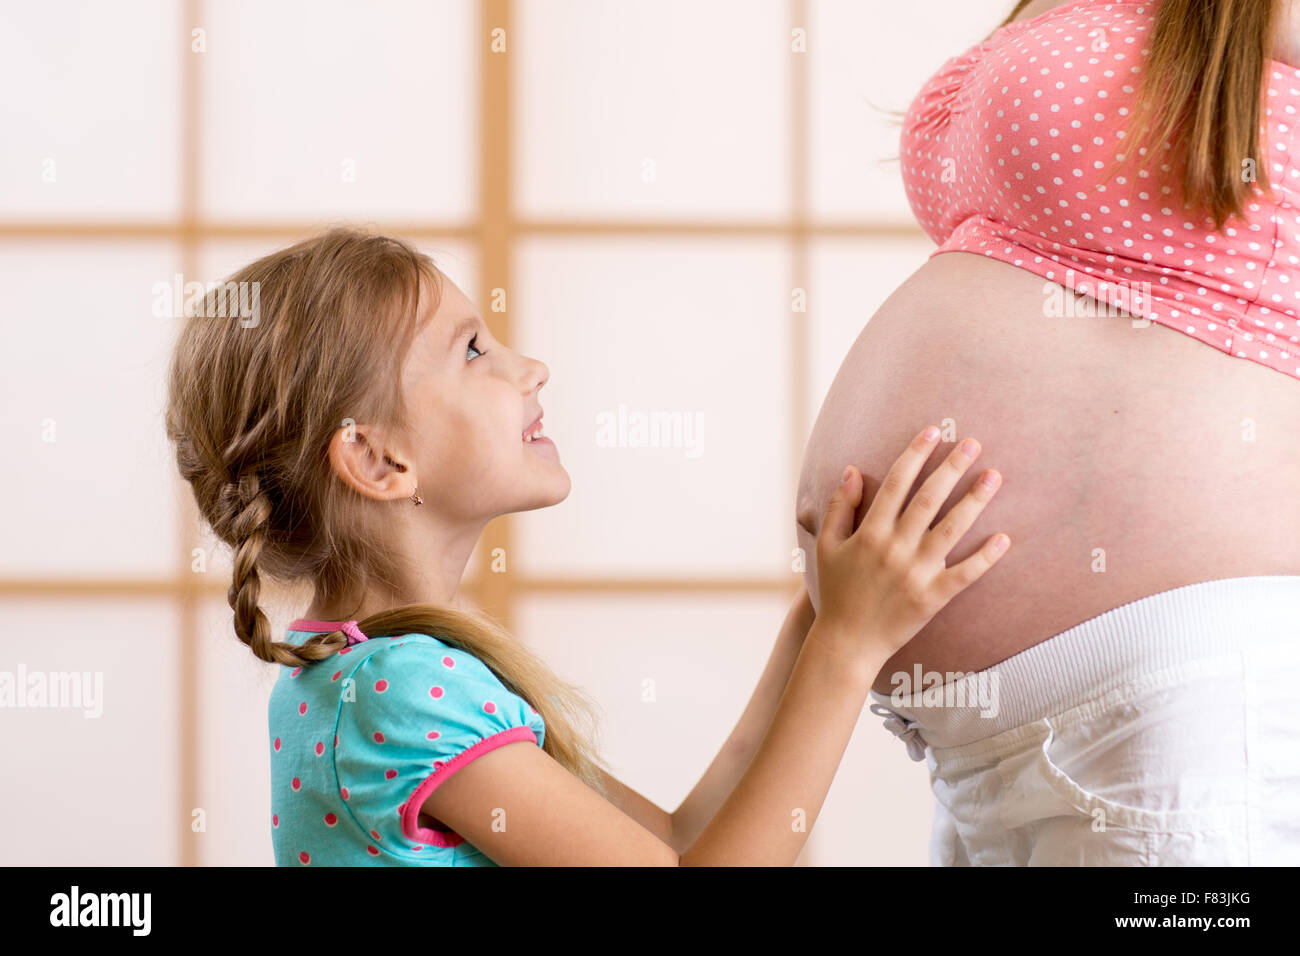 kid girl hugging and kooking at pregnant mother Stock Photo